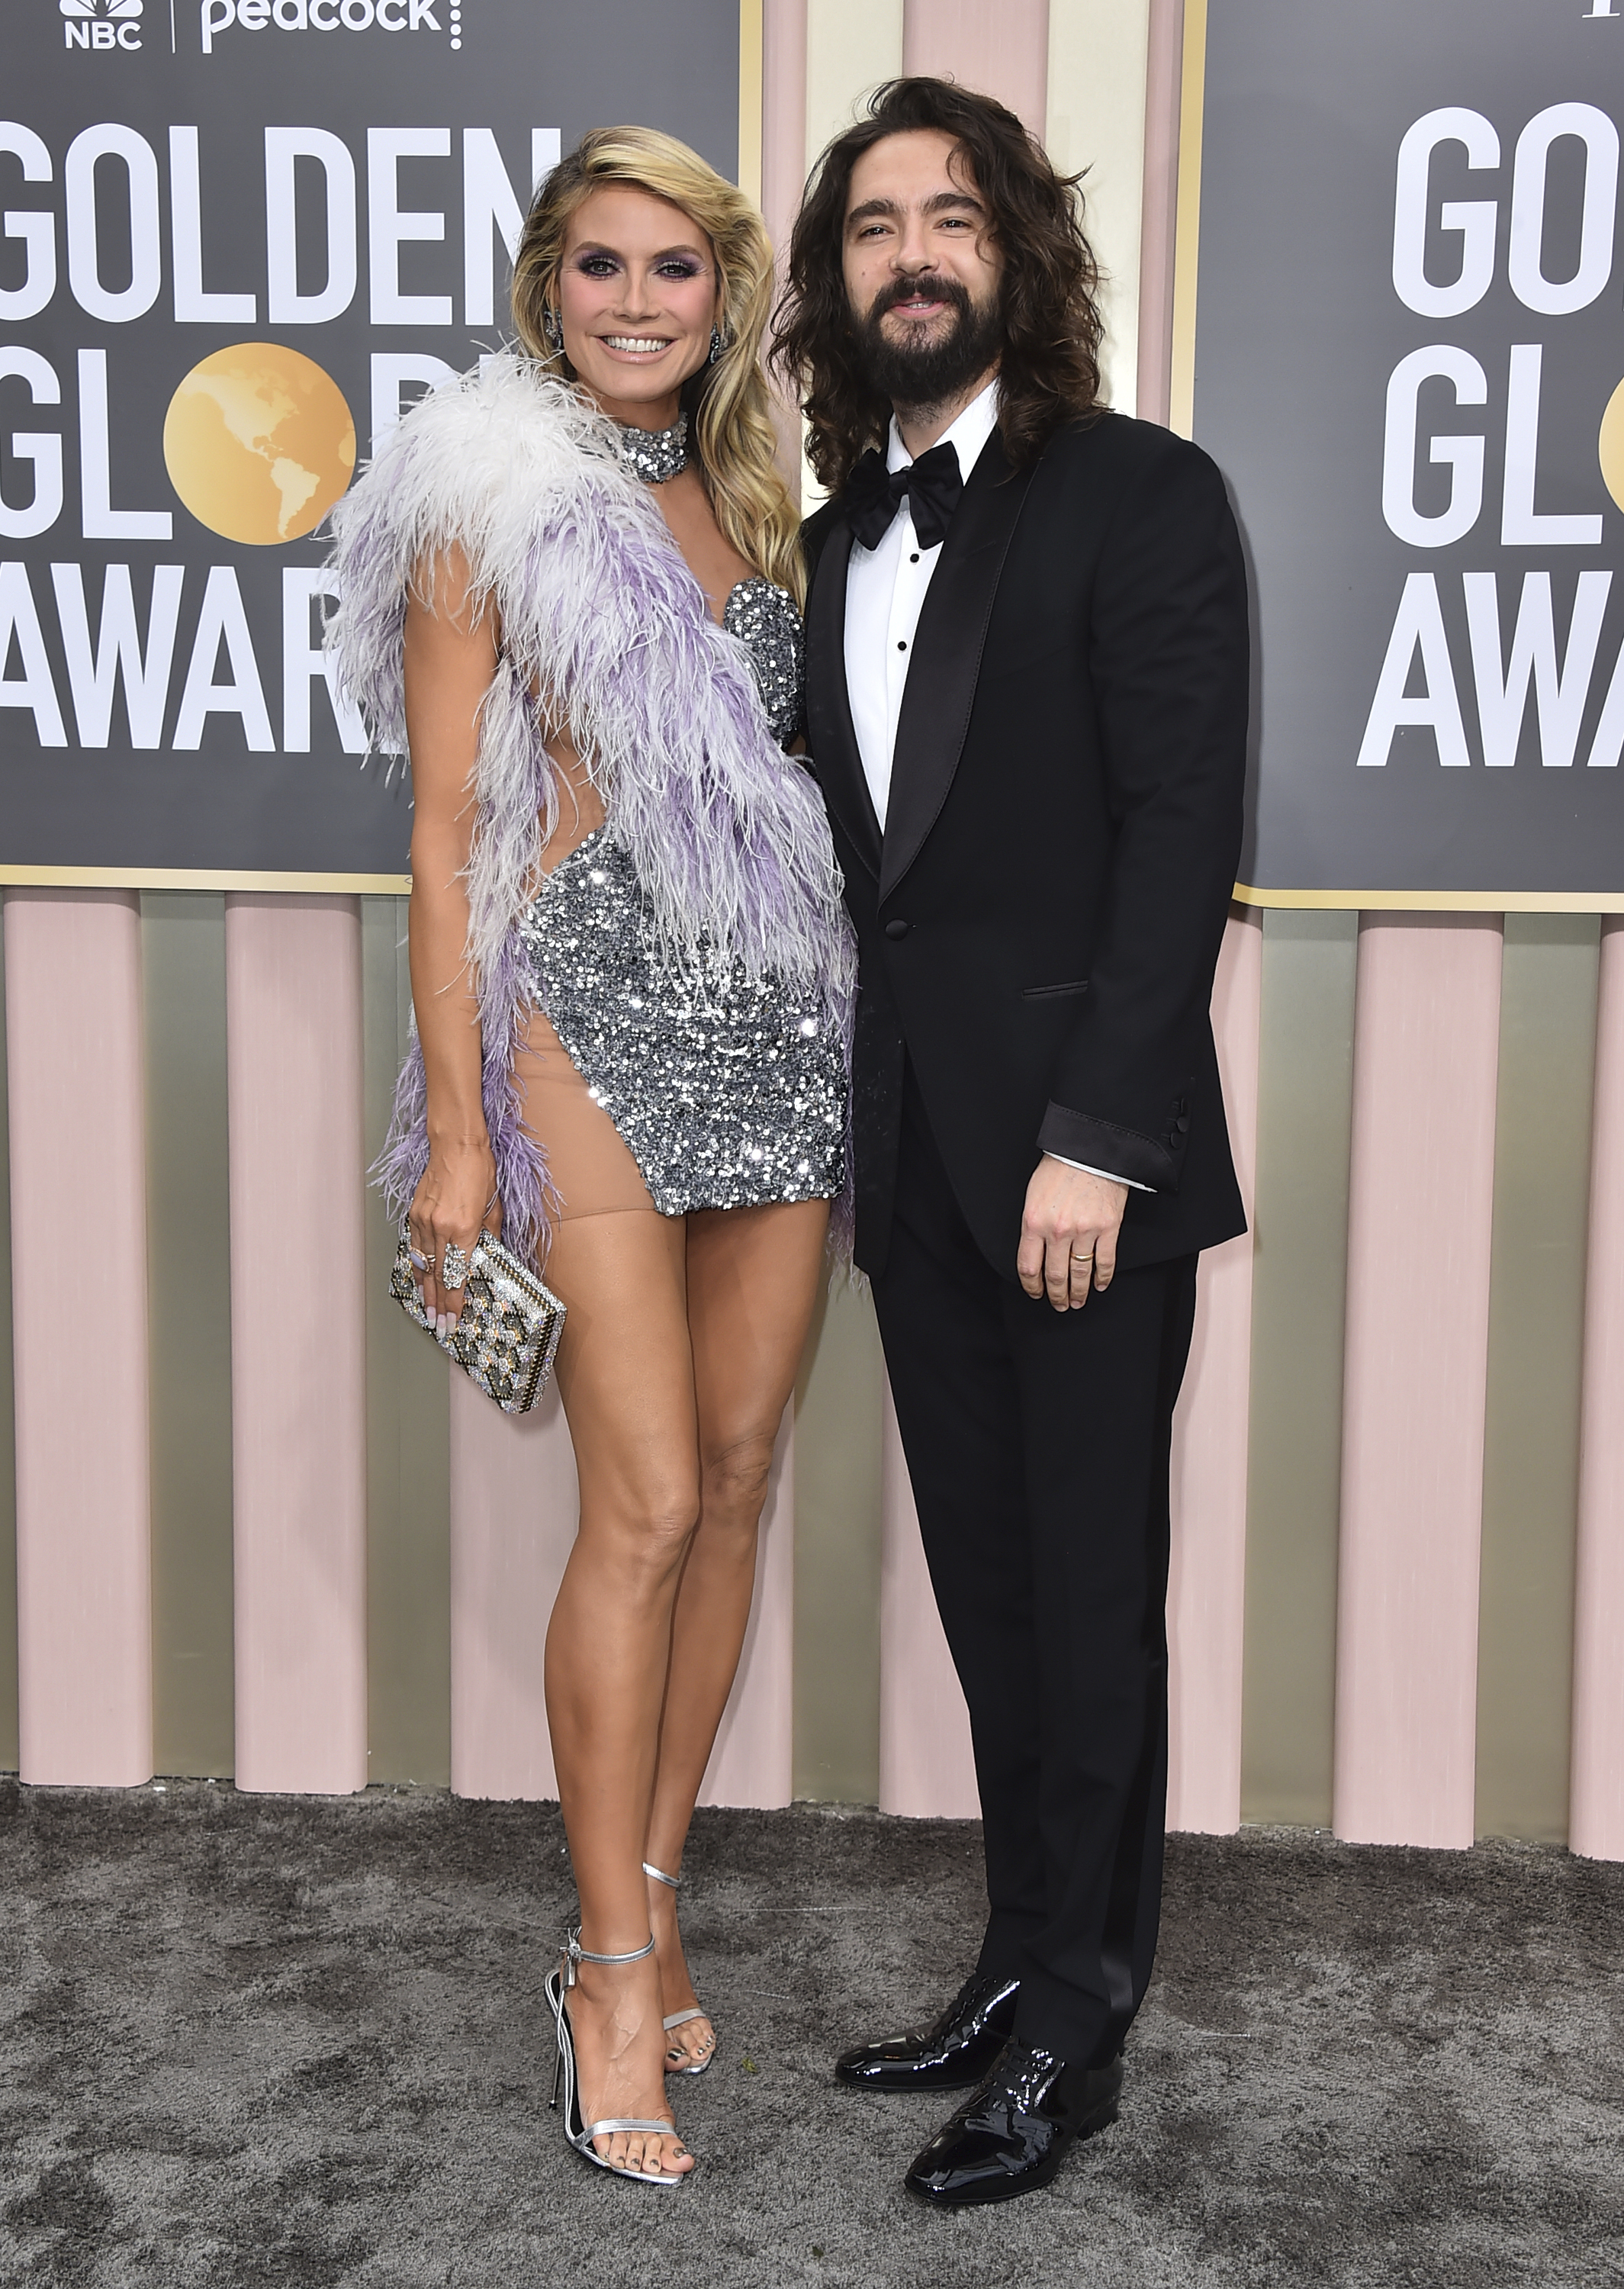 Heidi Klum, left, and Tom Kaulitz arrive at the 80th annual Golden Globe Awards at the Beverly Hilton Hotel on Tuesday, Jan. 10, 2023, in Beverly Hills, Calif. (Photo by Jordan Strauss/Invision/AP)